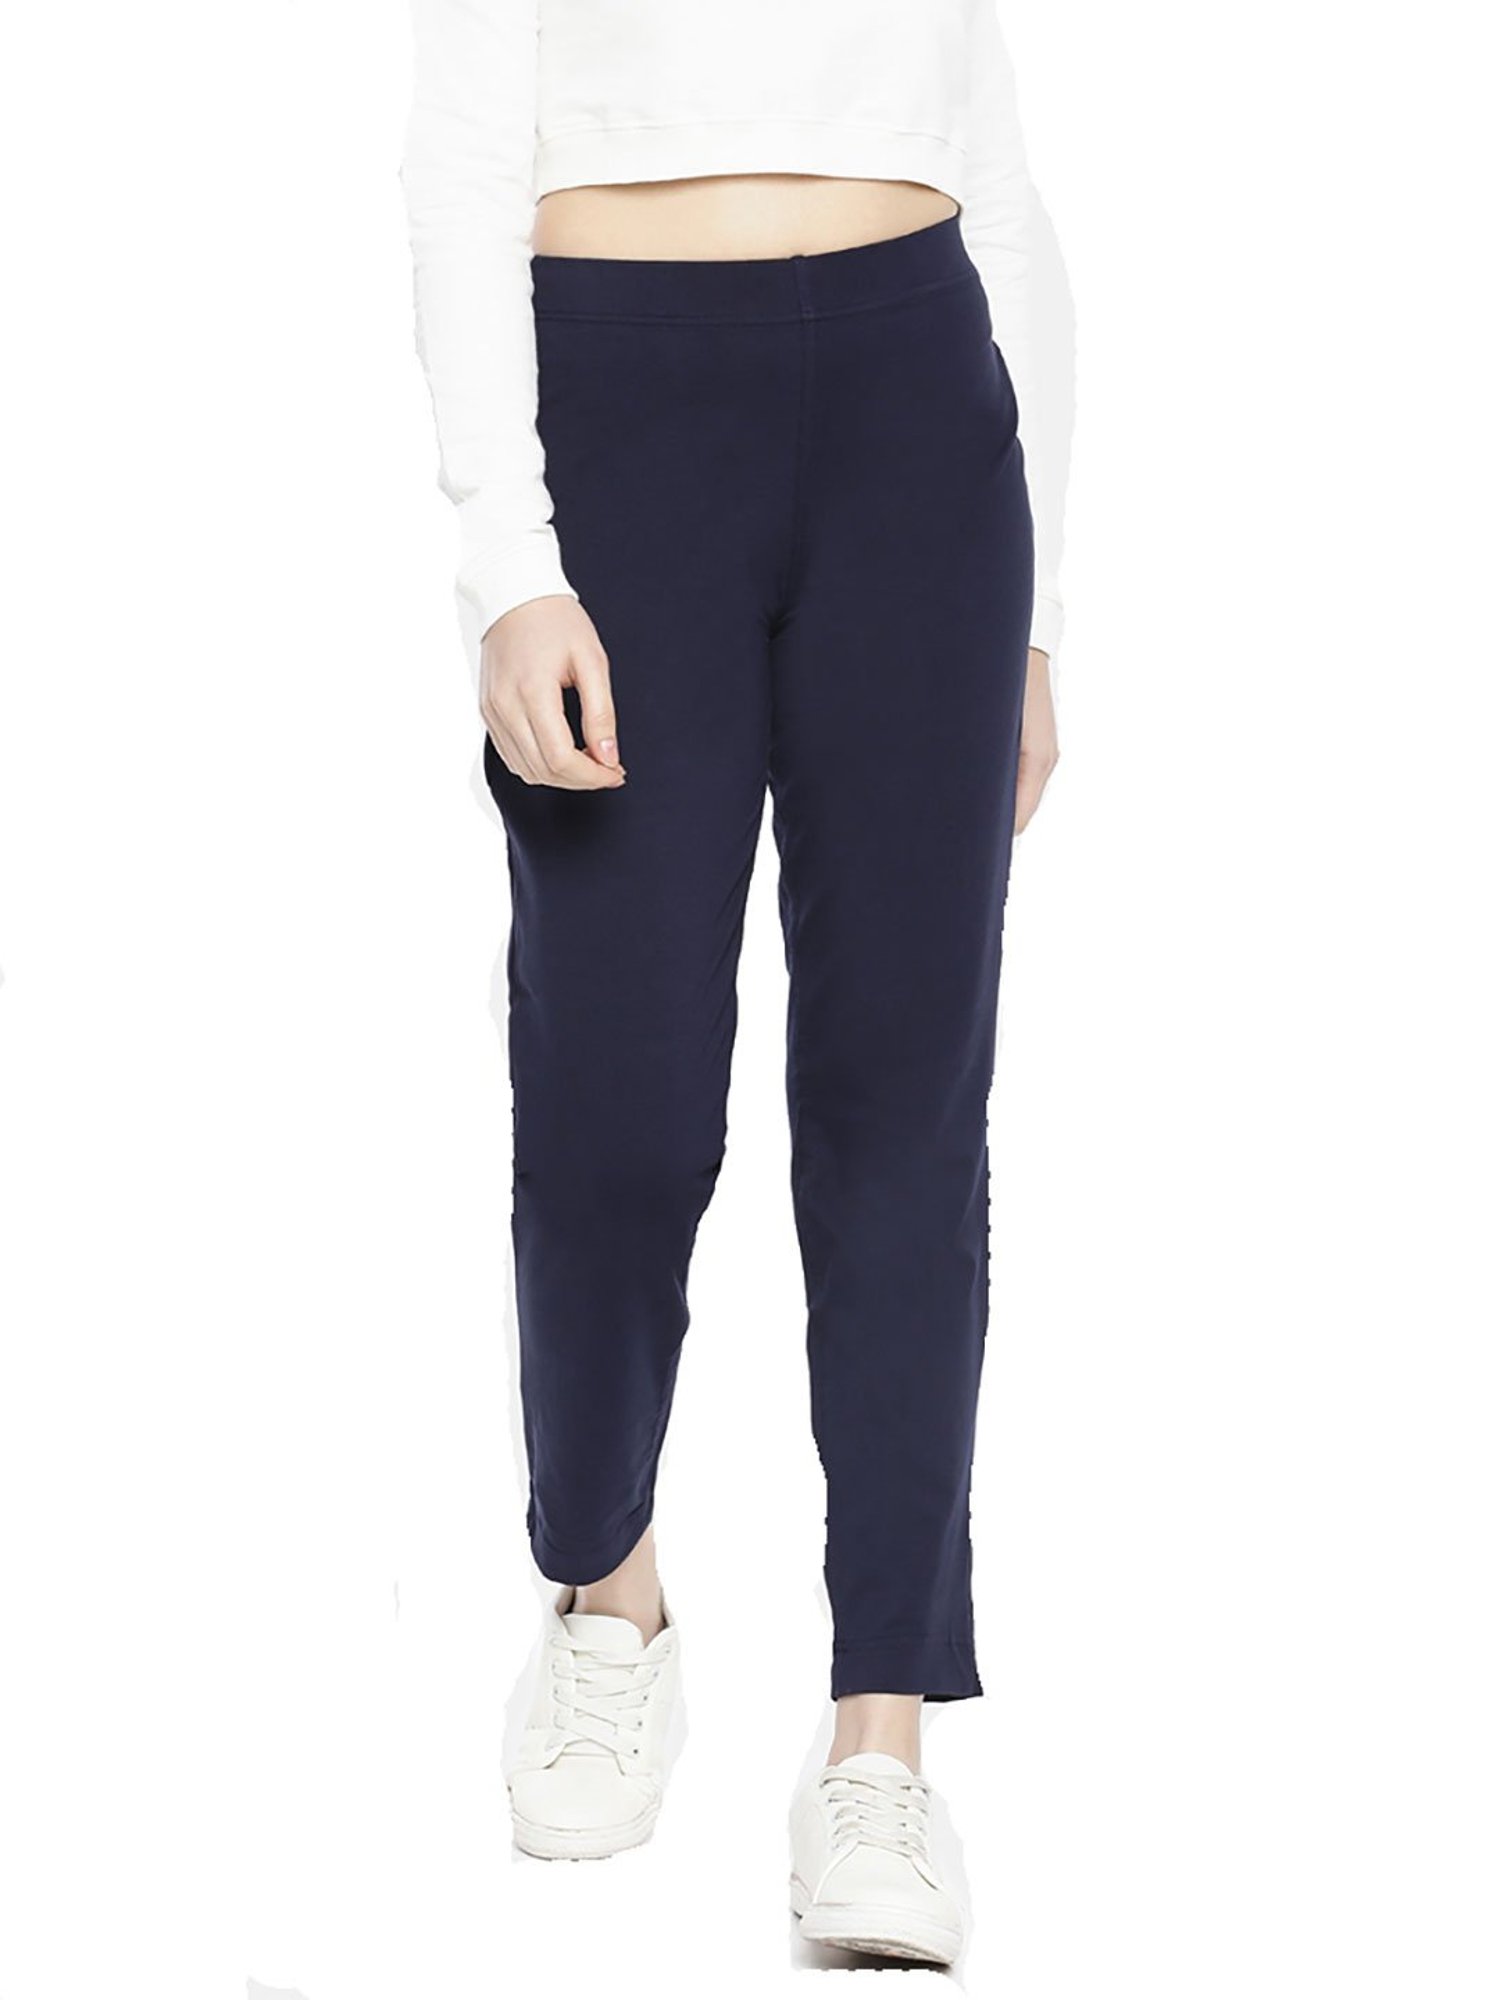 Cigarette trousers  Navy blue  Ladies  HM IN